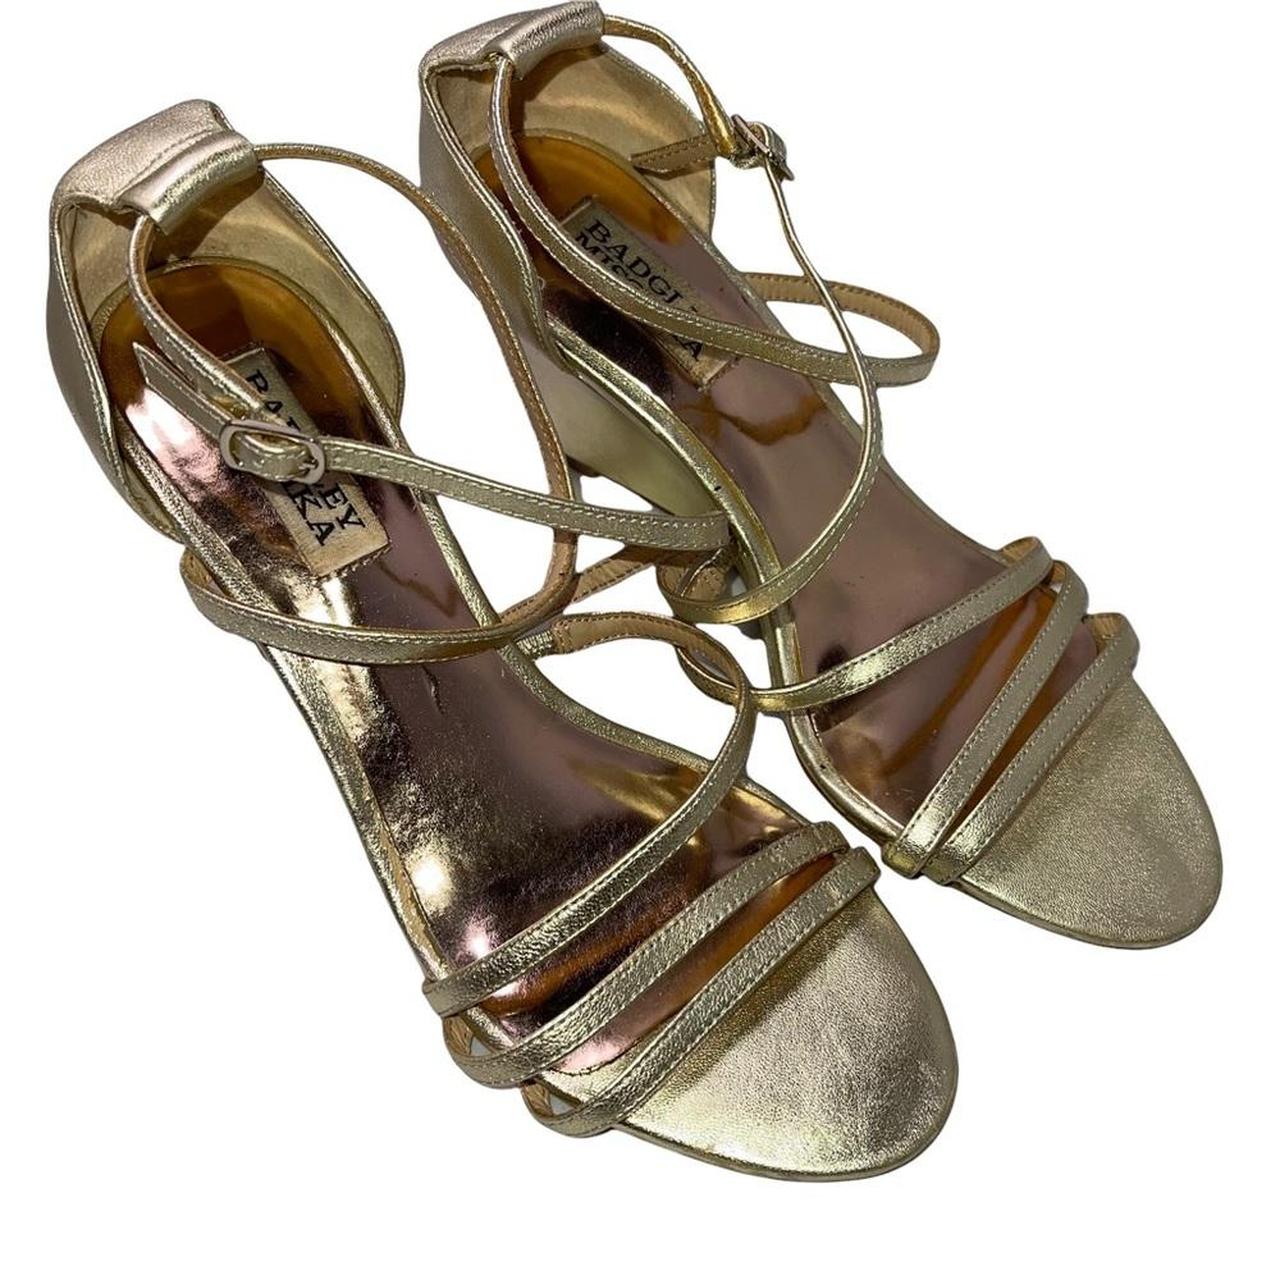 Product Image 2 - Badgley Mischka Gold Strappy Wedges.